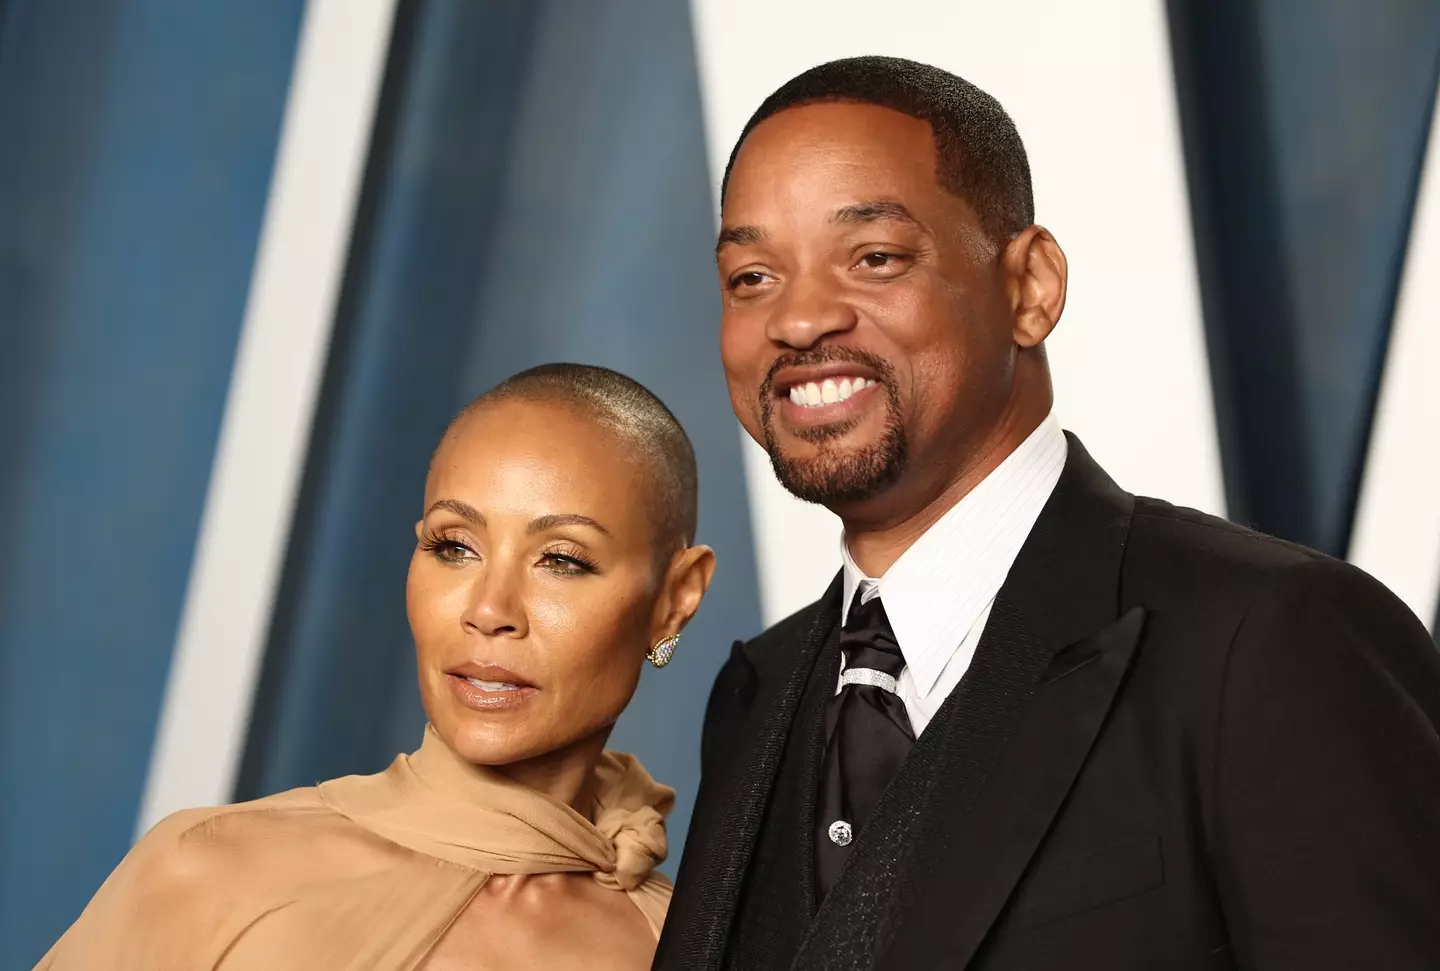 Will Smith opened up about the pair's relationship.